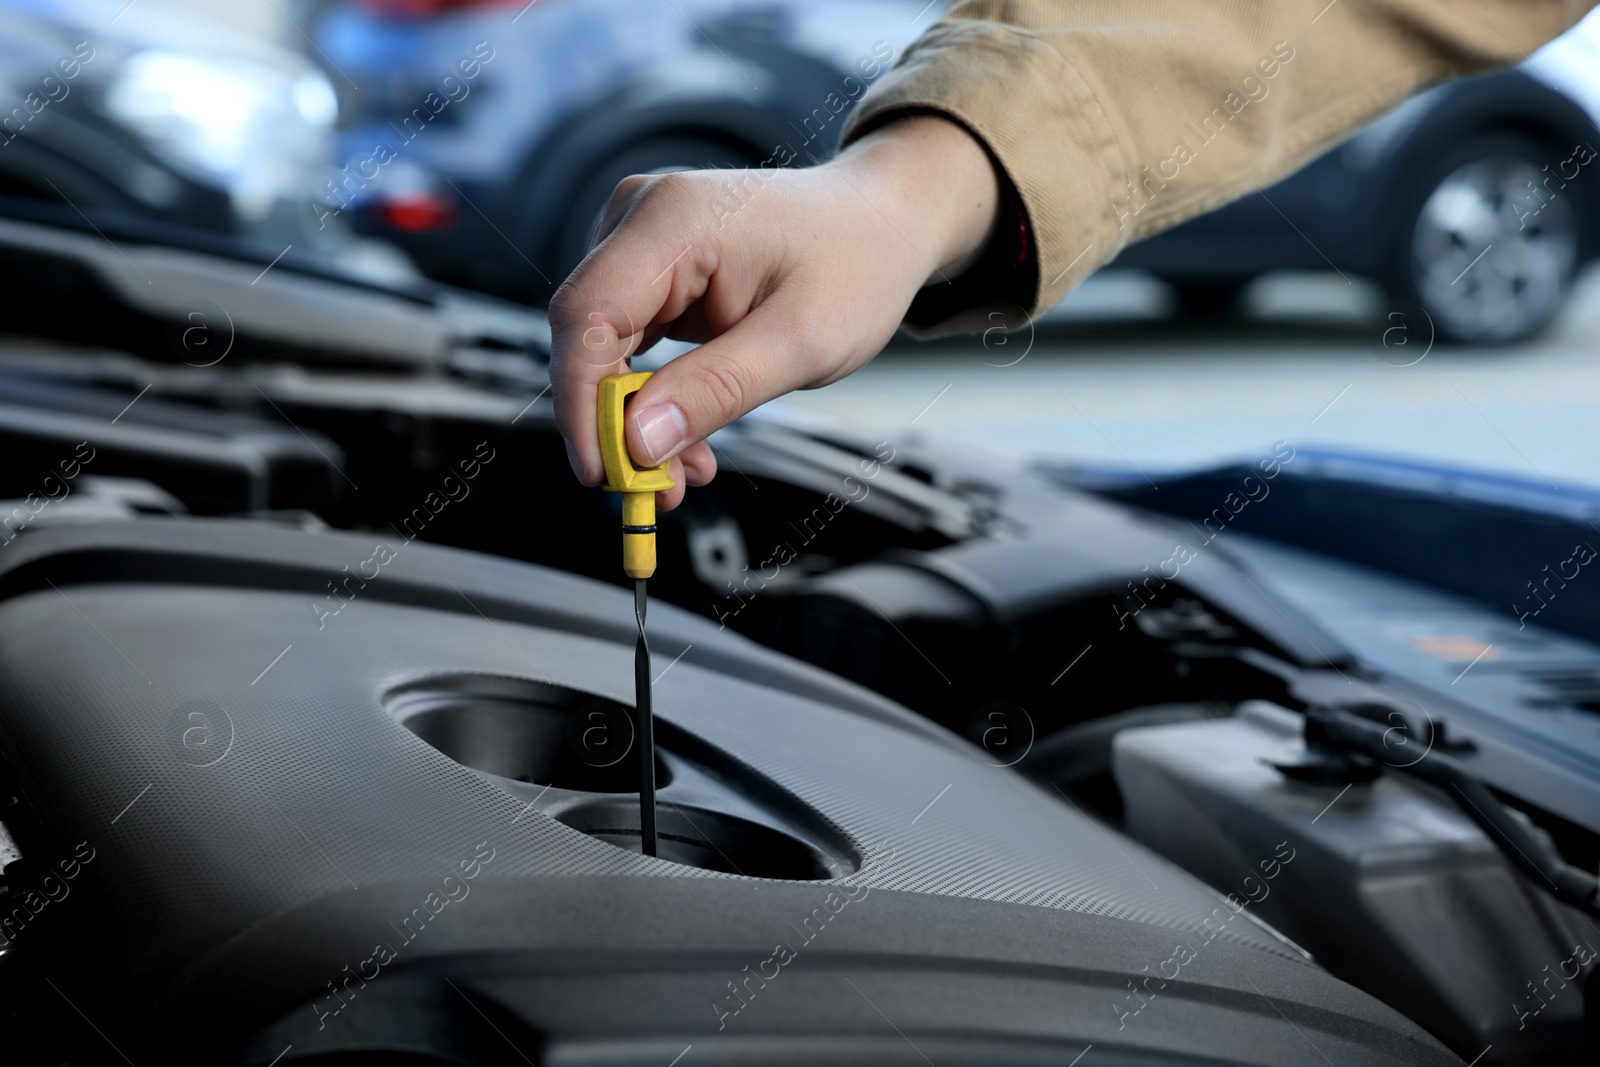 Photo of Man checking motor oil level in car with dipstick, closeup